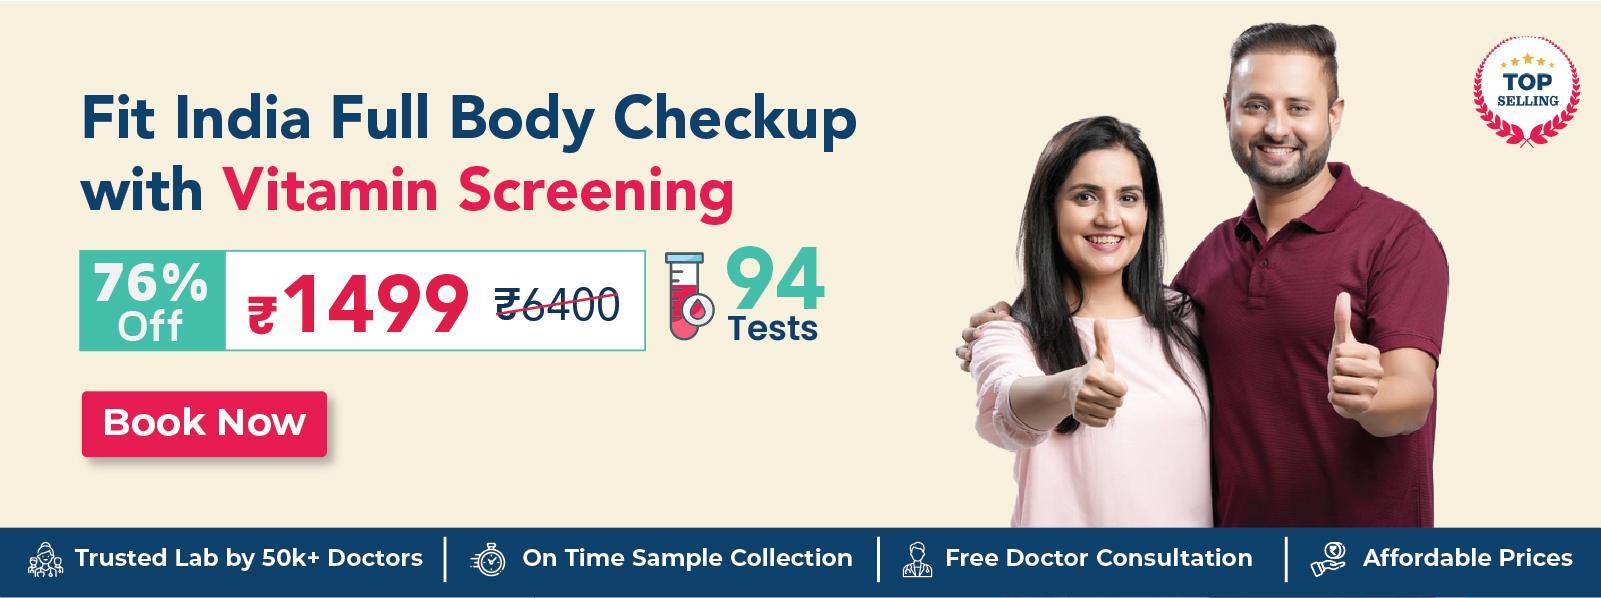 Fit India Full Body checkup with Vitamin Screening in Secunderabad